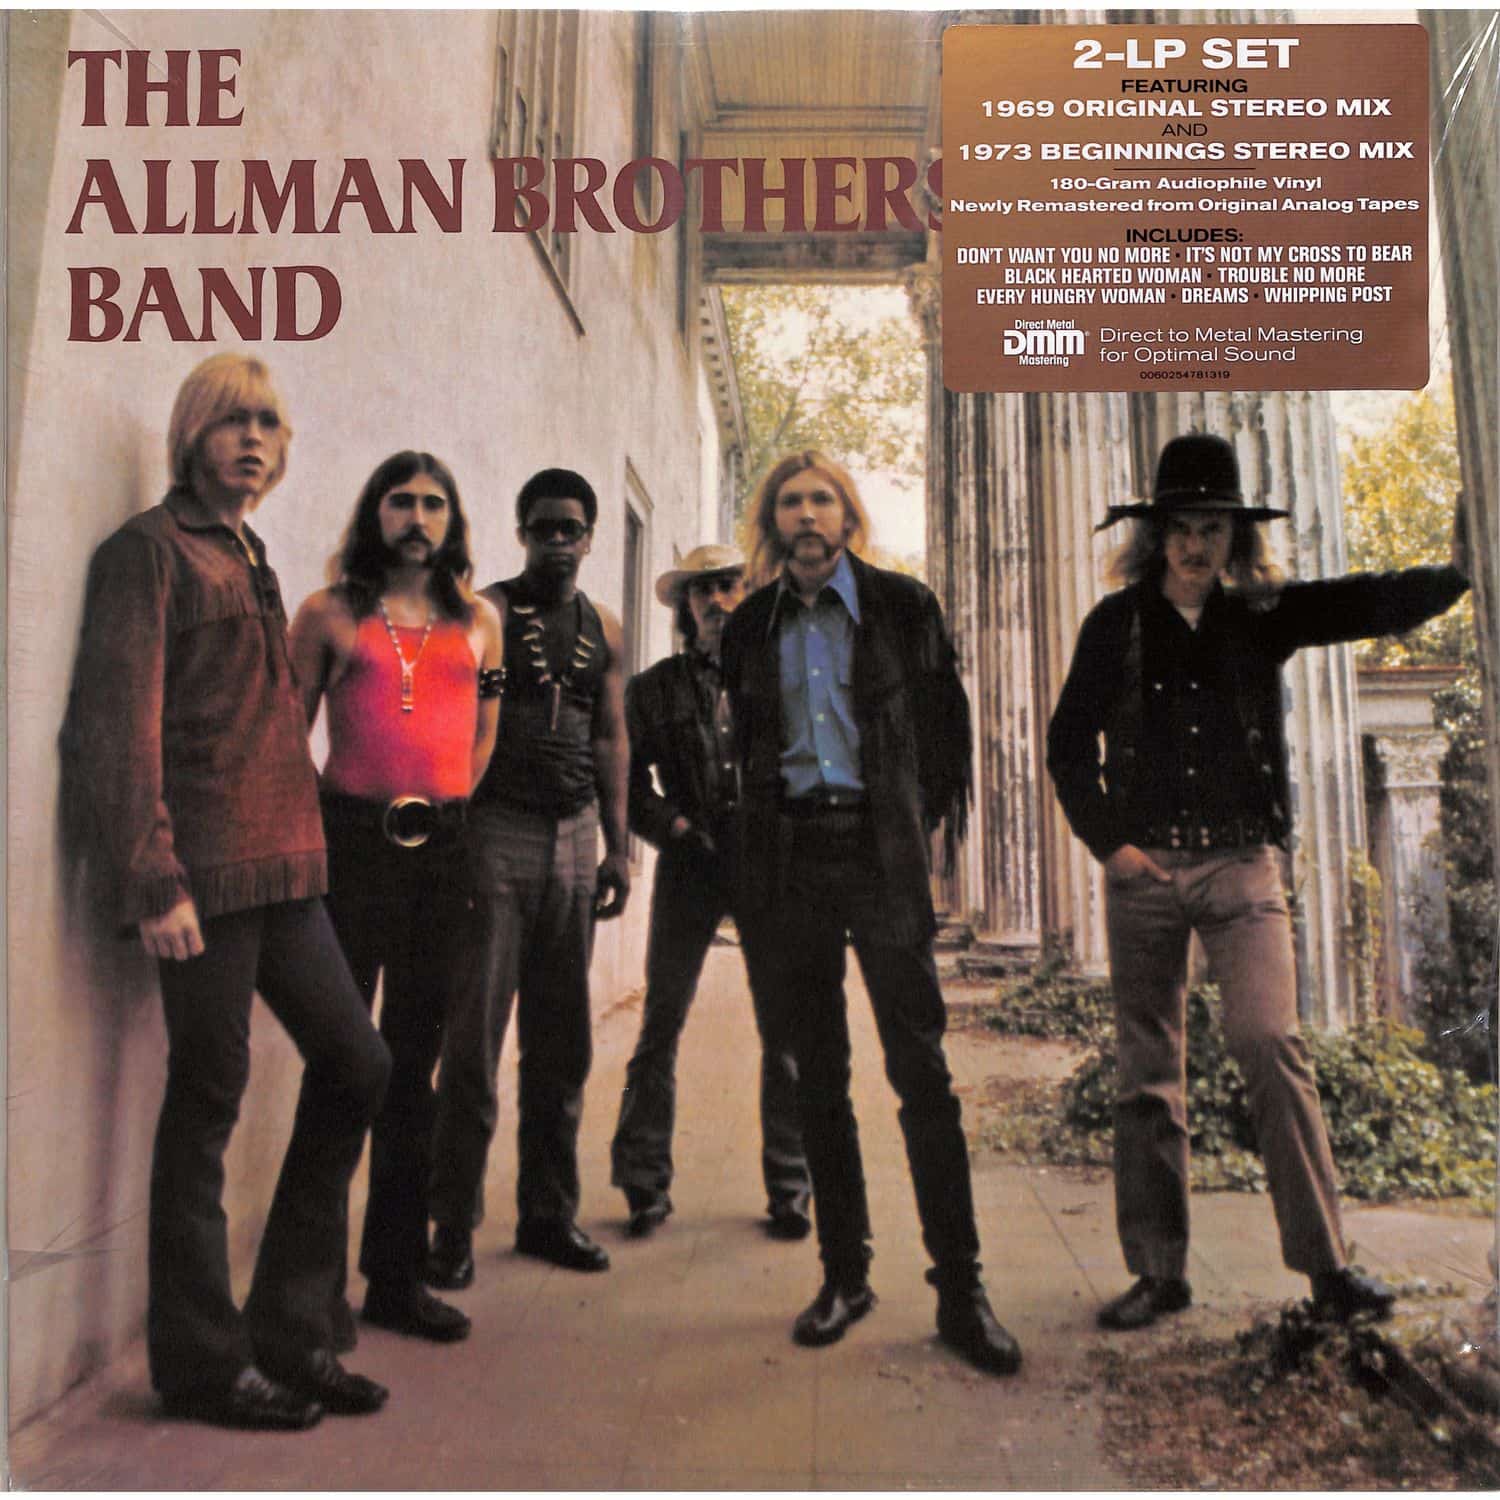 The Allman Brothers Band - THE ALLMAN BROTHERS BAND 